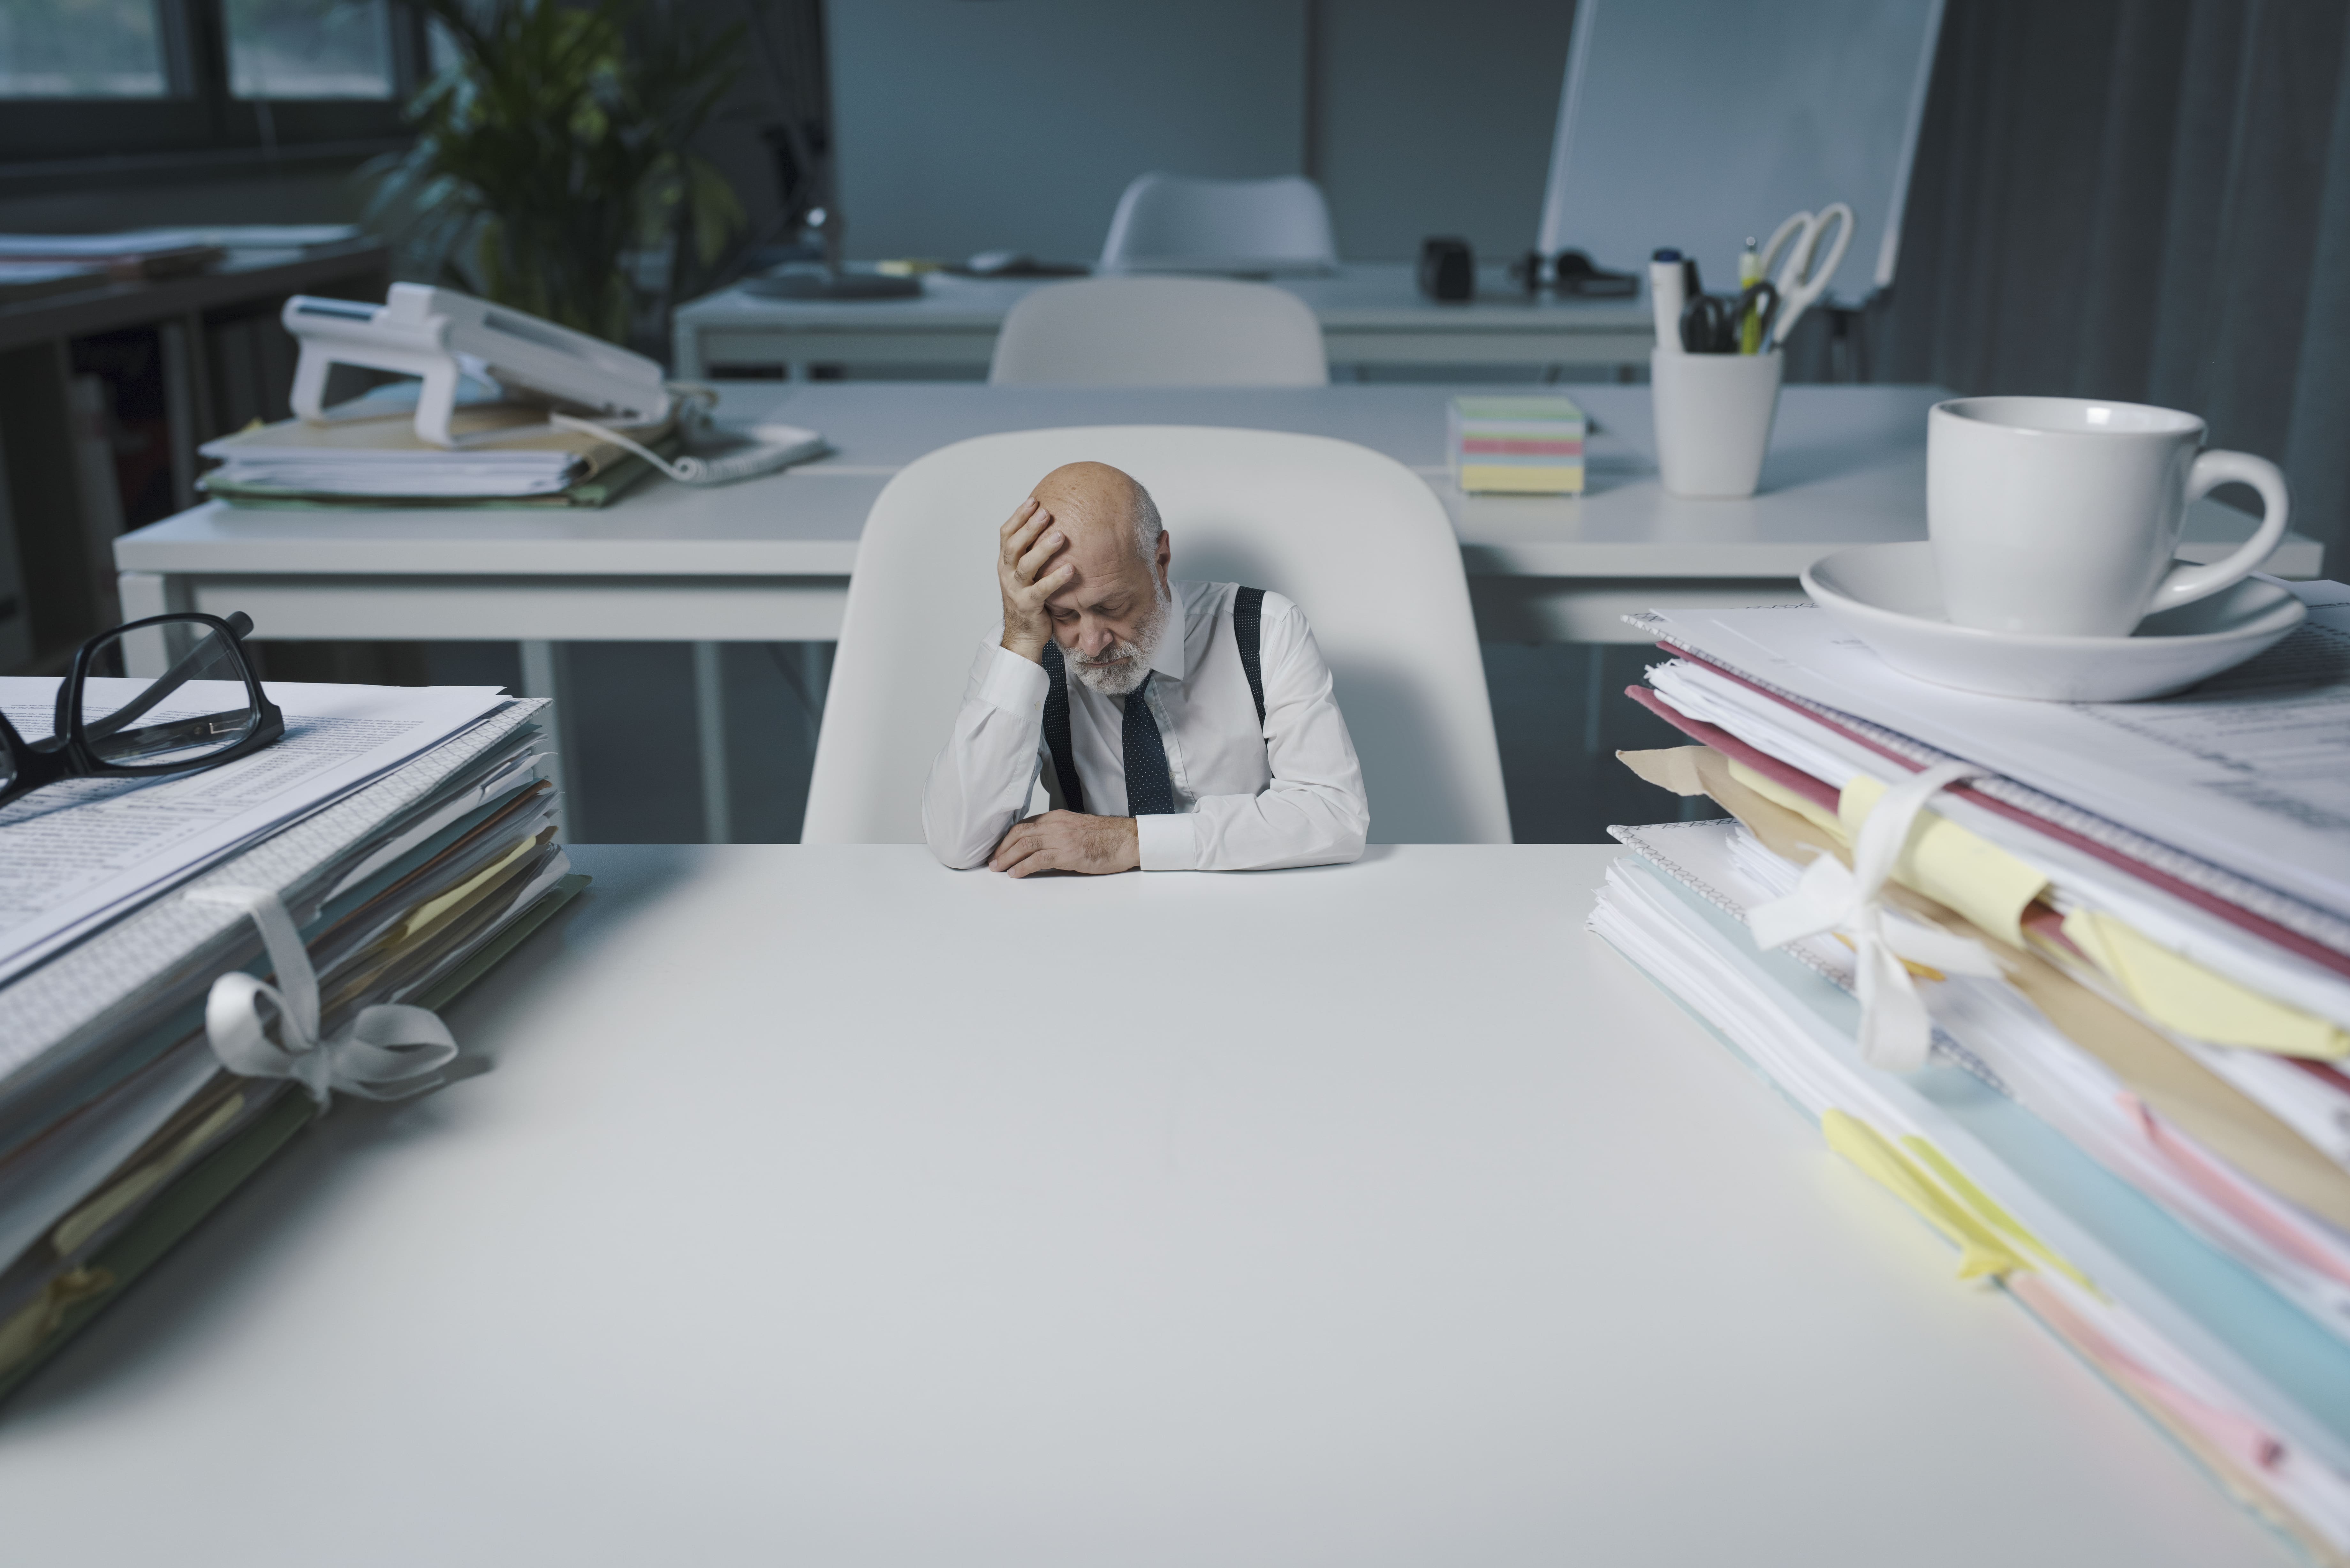 Dealing with pilot fatigue in CRM training